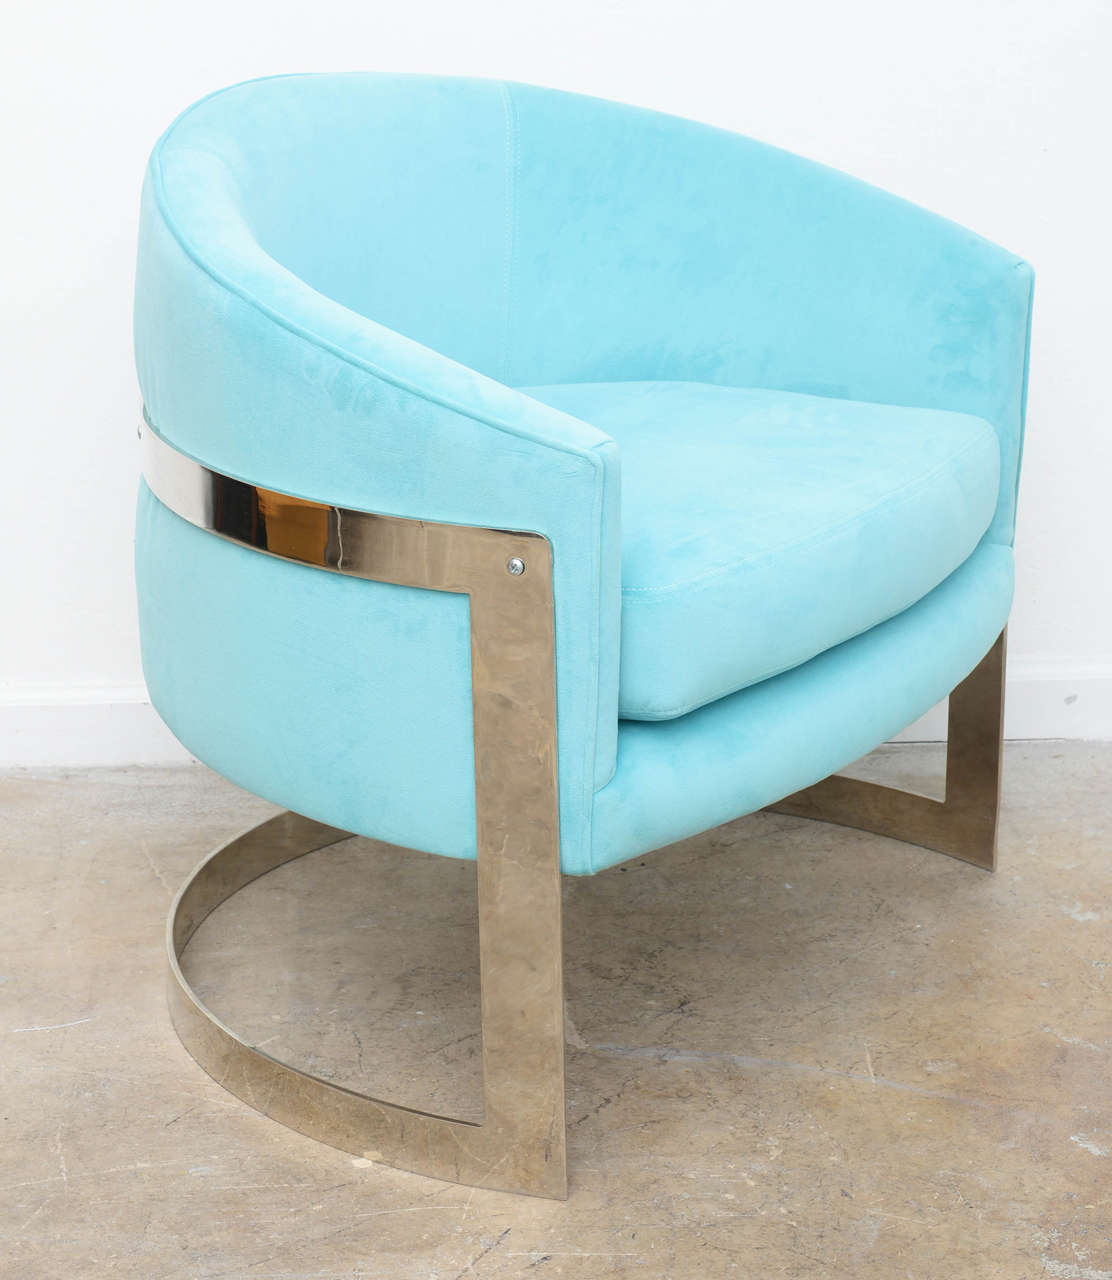 These amazing barrel chairs were designed in the 1970s by Milo Baughman for Thayer Coggin. Although we only photographed four chairs we have left two chairs. They are priced at $3800 per pair They have all been refoamed and upholstered in an aqua